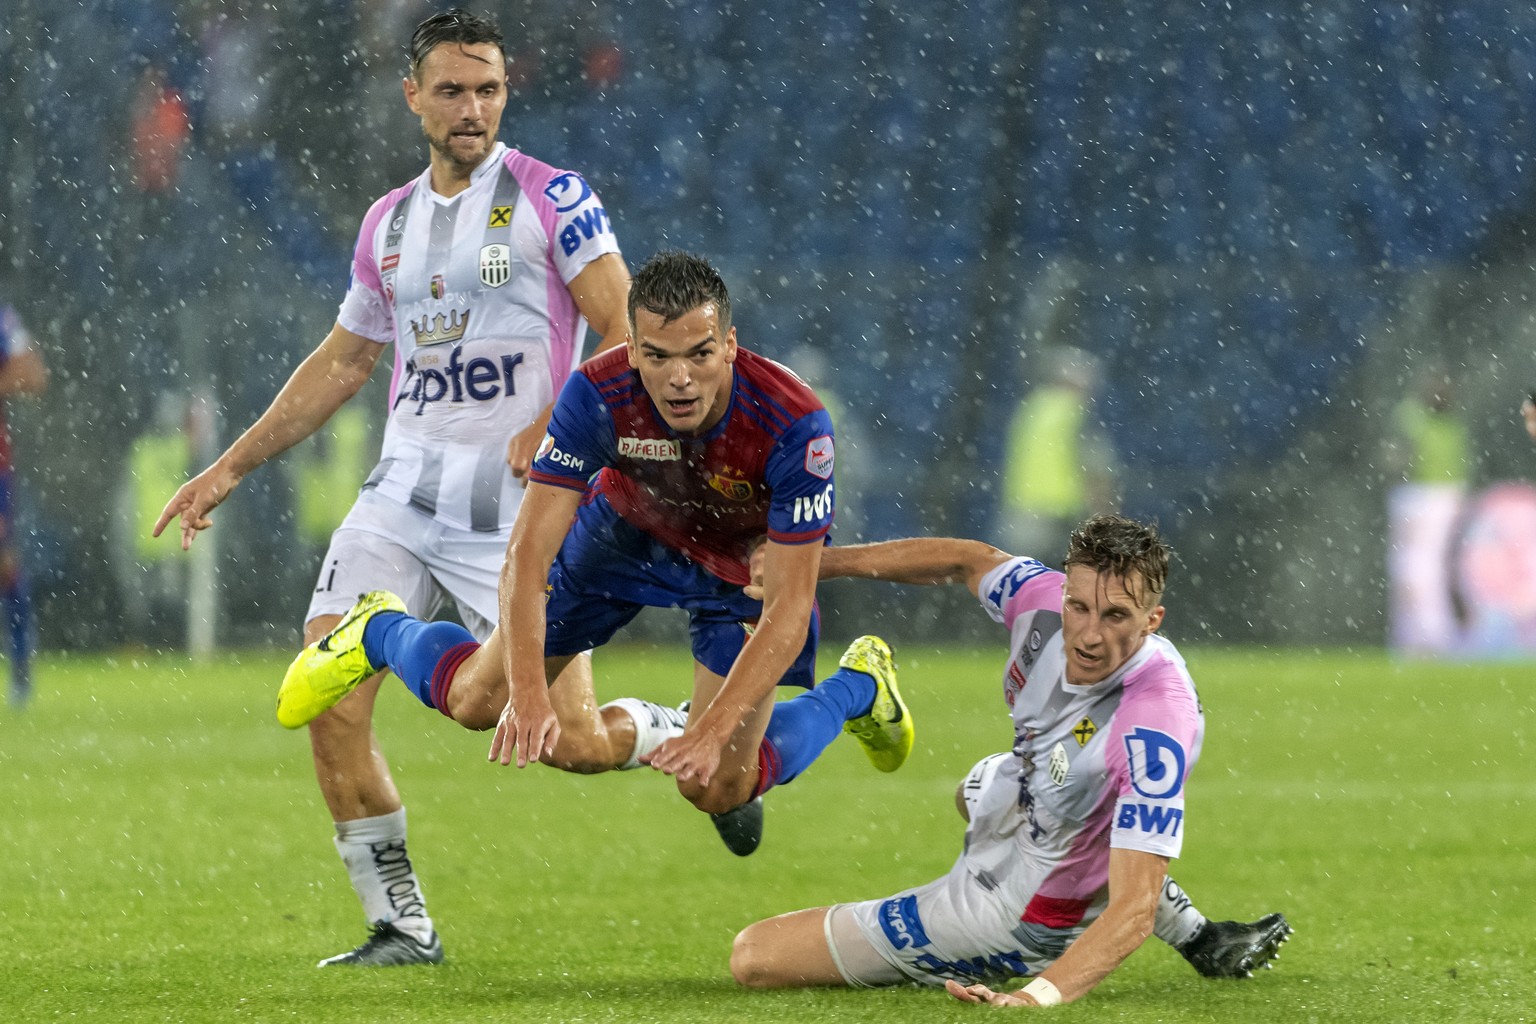 LASK&#039;s Rene Renner, Basel&#039;s Kevin Bua and LASK&#039;s Philipp Wiesinger, from left, during the UEFA Champions League third qualifying round first leg match between Switzerland&#039;s FC Base ...